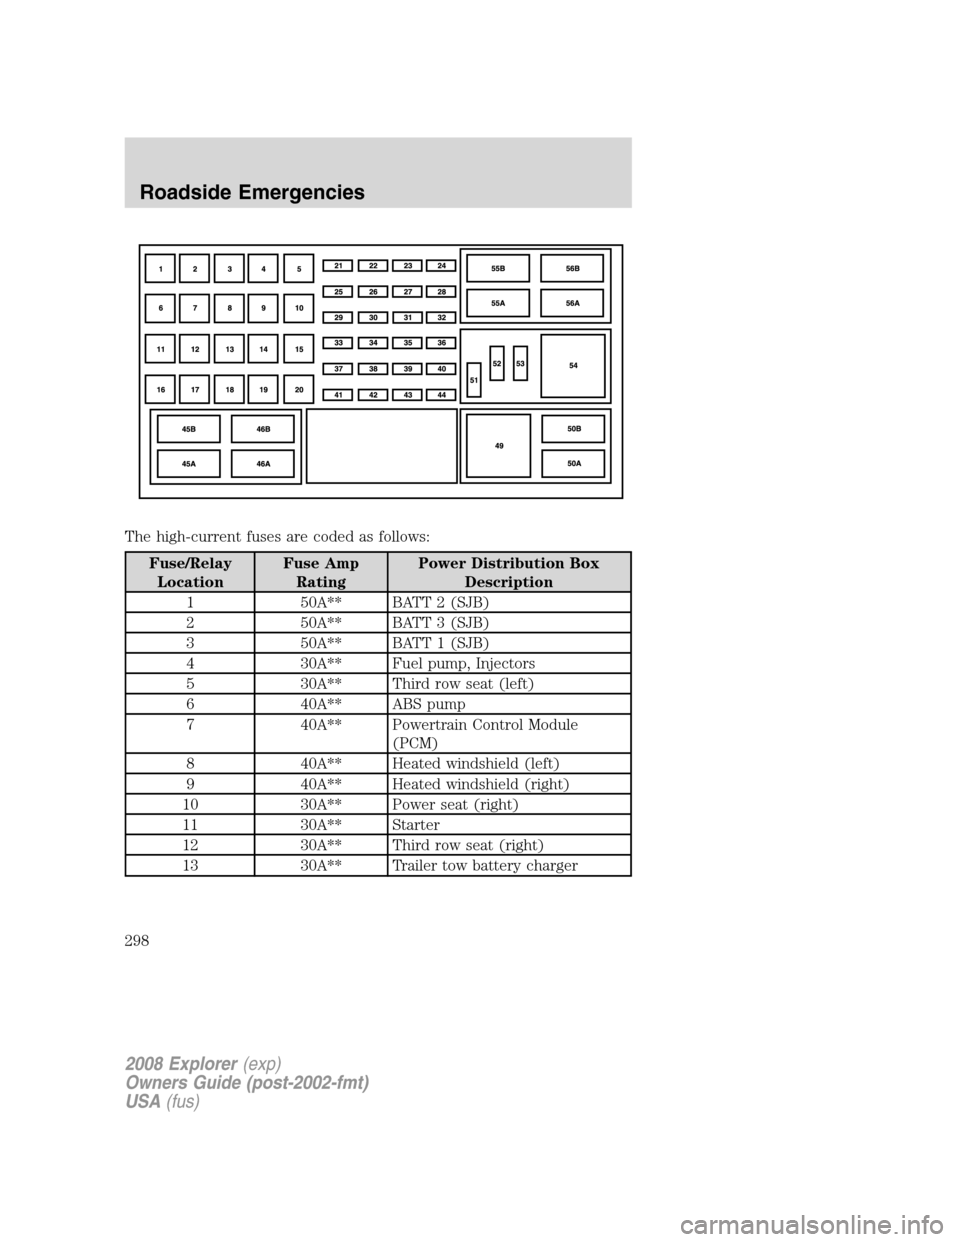 FORD EXPLORER 2008 4.G Owners Manual The high-current fuses are coded as follows:
Fuse/Relay
LocationFuse Amp
RatingPower Distribution Box
Description
1 50A** BATT 2 (SJB)
2 50A** BATT 3 (SJB)
3 50A** BATT 1 (SJB)
4 30A** Fuel pump, Inje